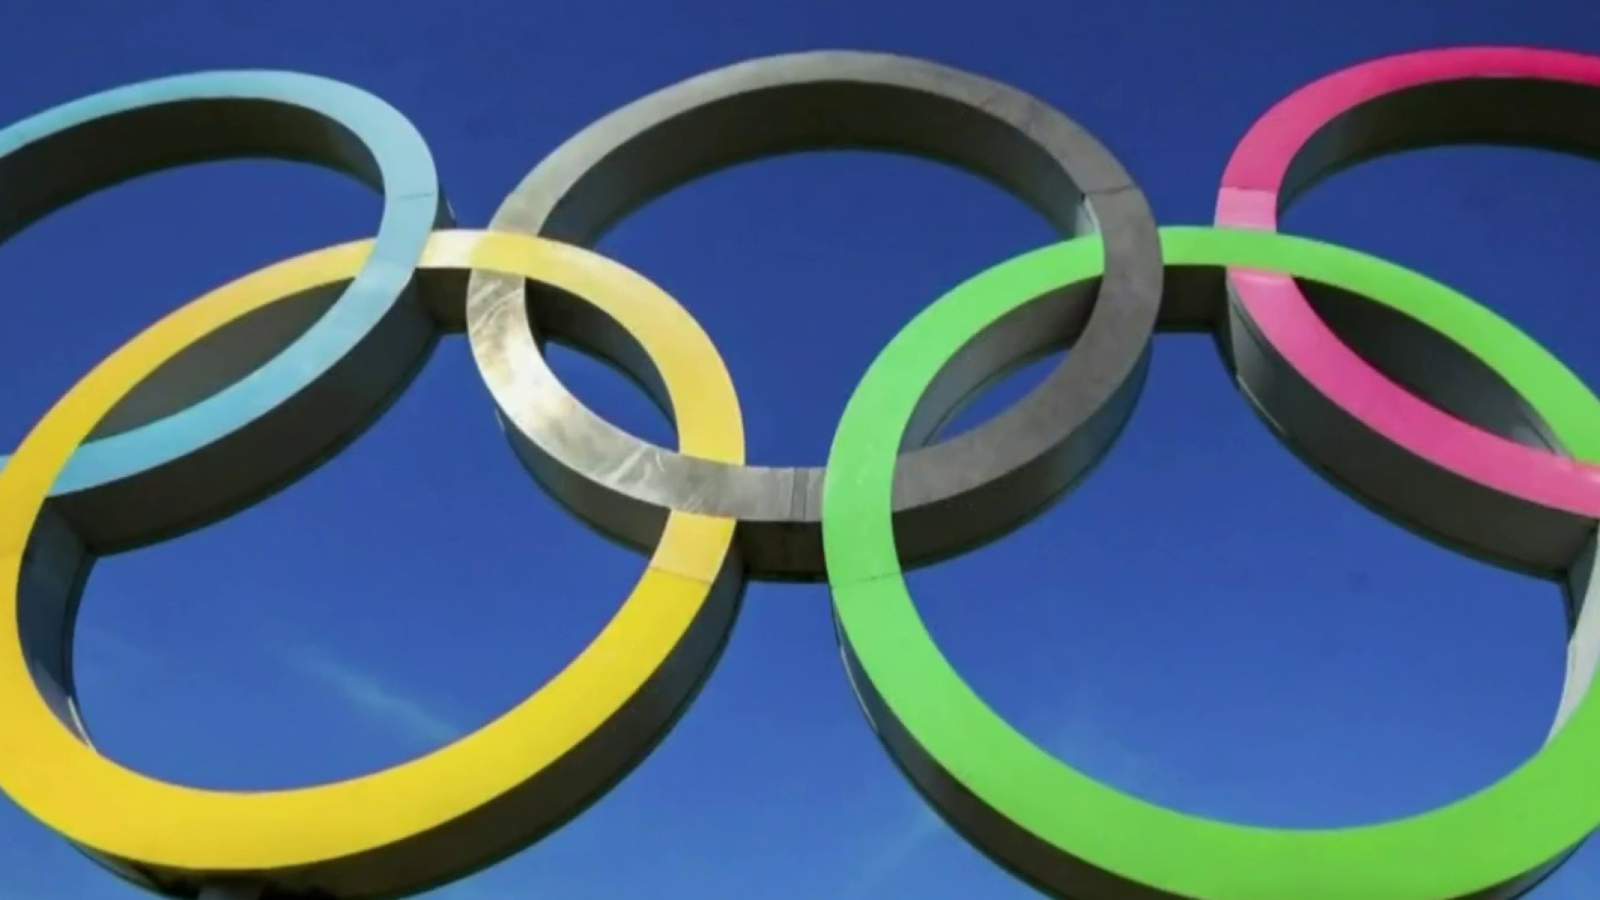 Japan denies report Tokyo Olympics could be cancelled